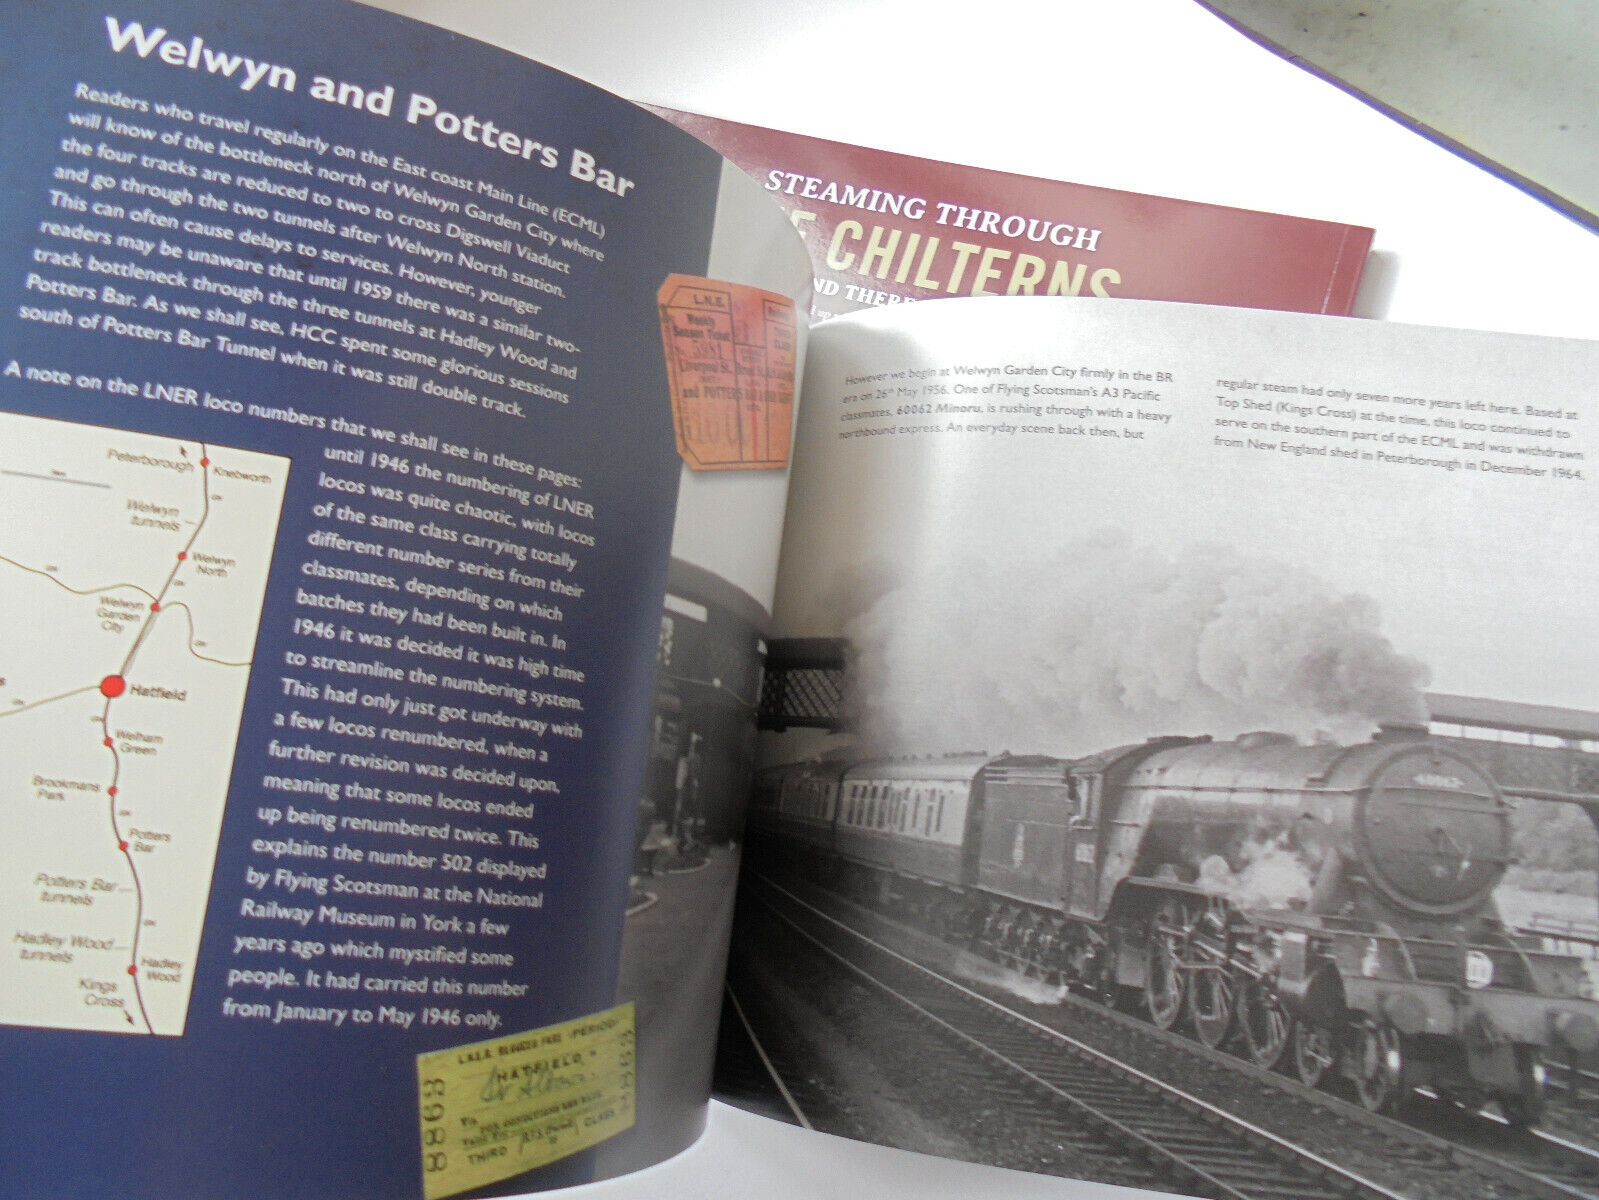 50%+ OFF RRP is £22.95  STEAMING THROUGH THE CHILTERNS AND THEREABOUTS